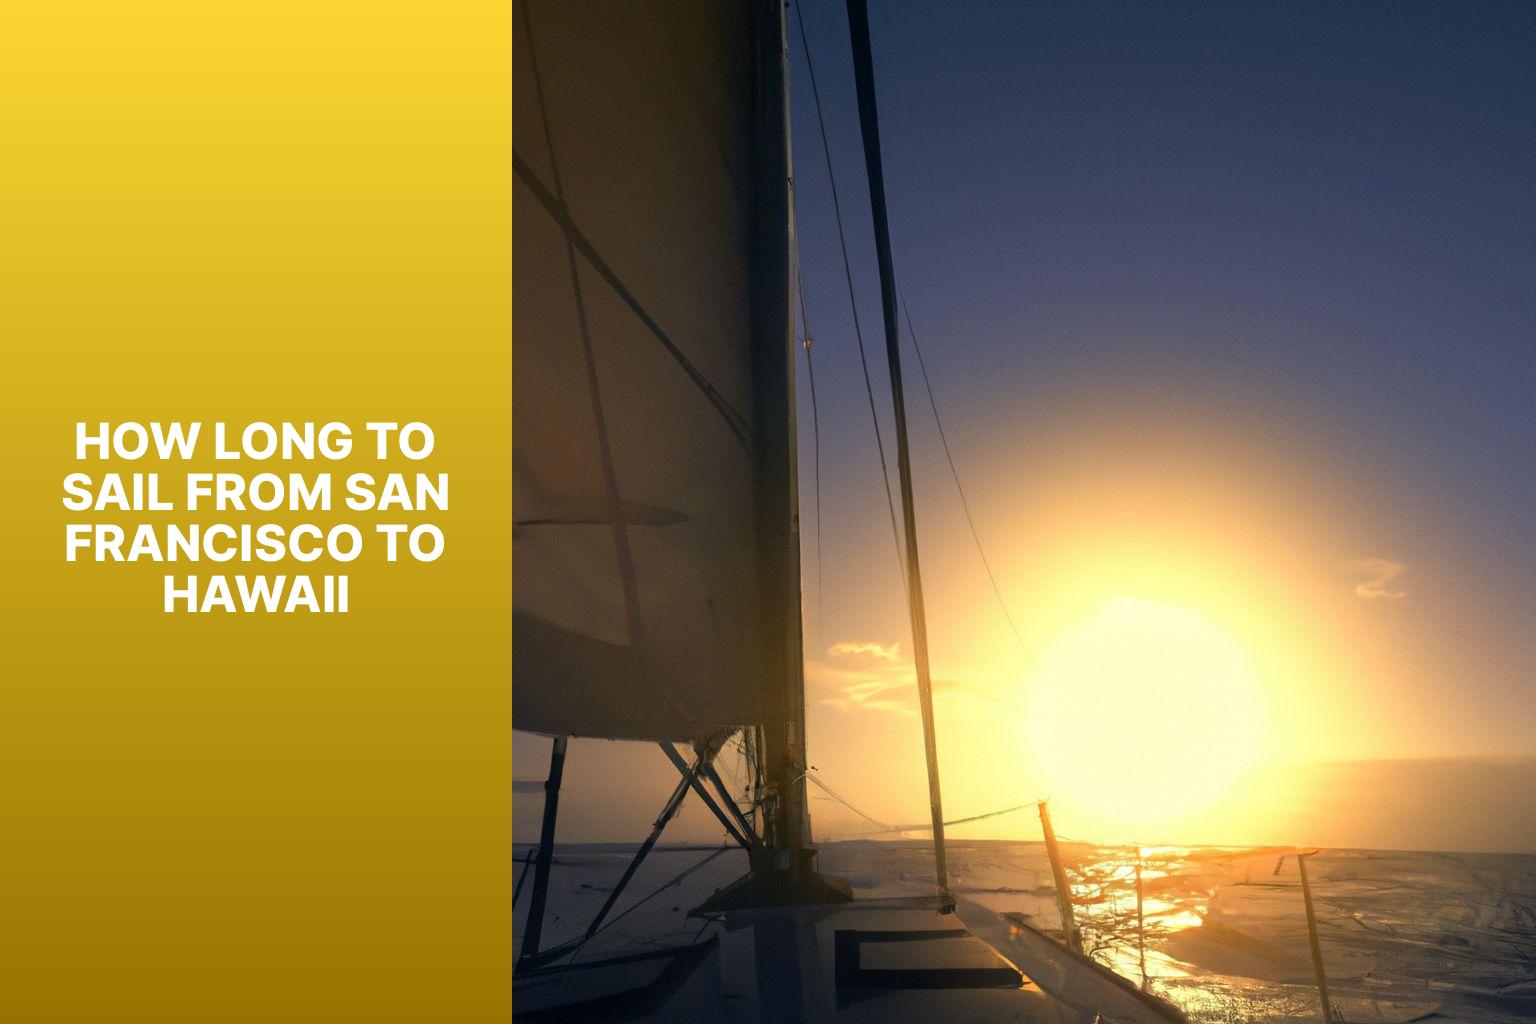 Sailing from San Francisco to Hawaii: How Long Does It Take?